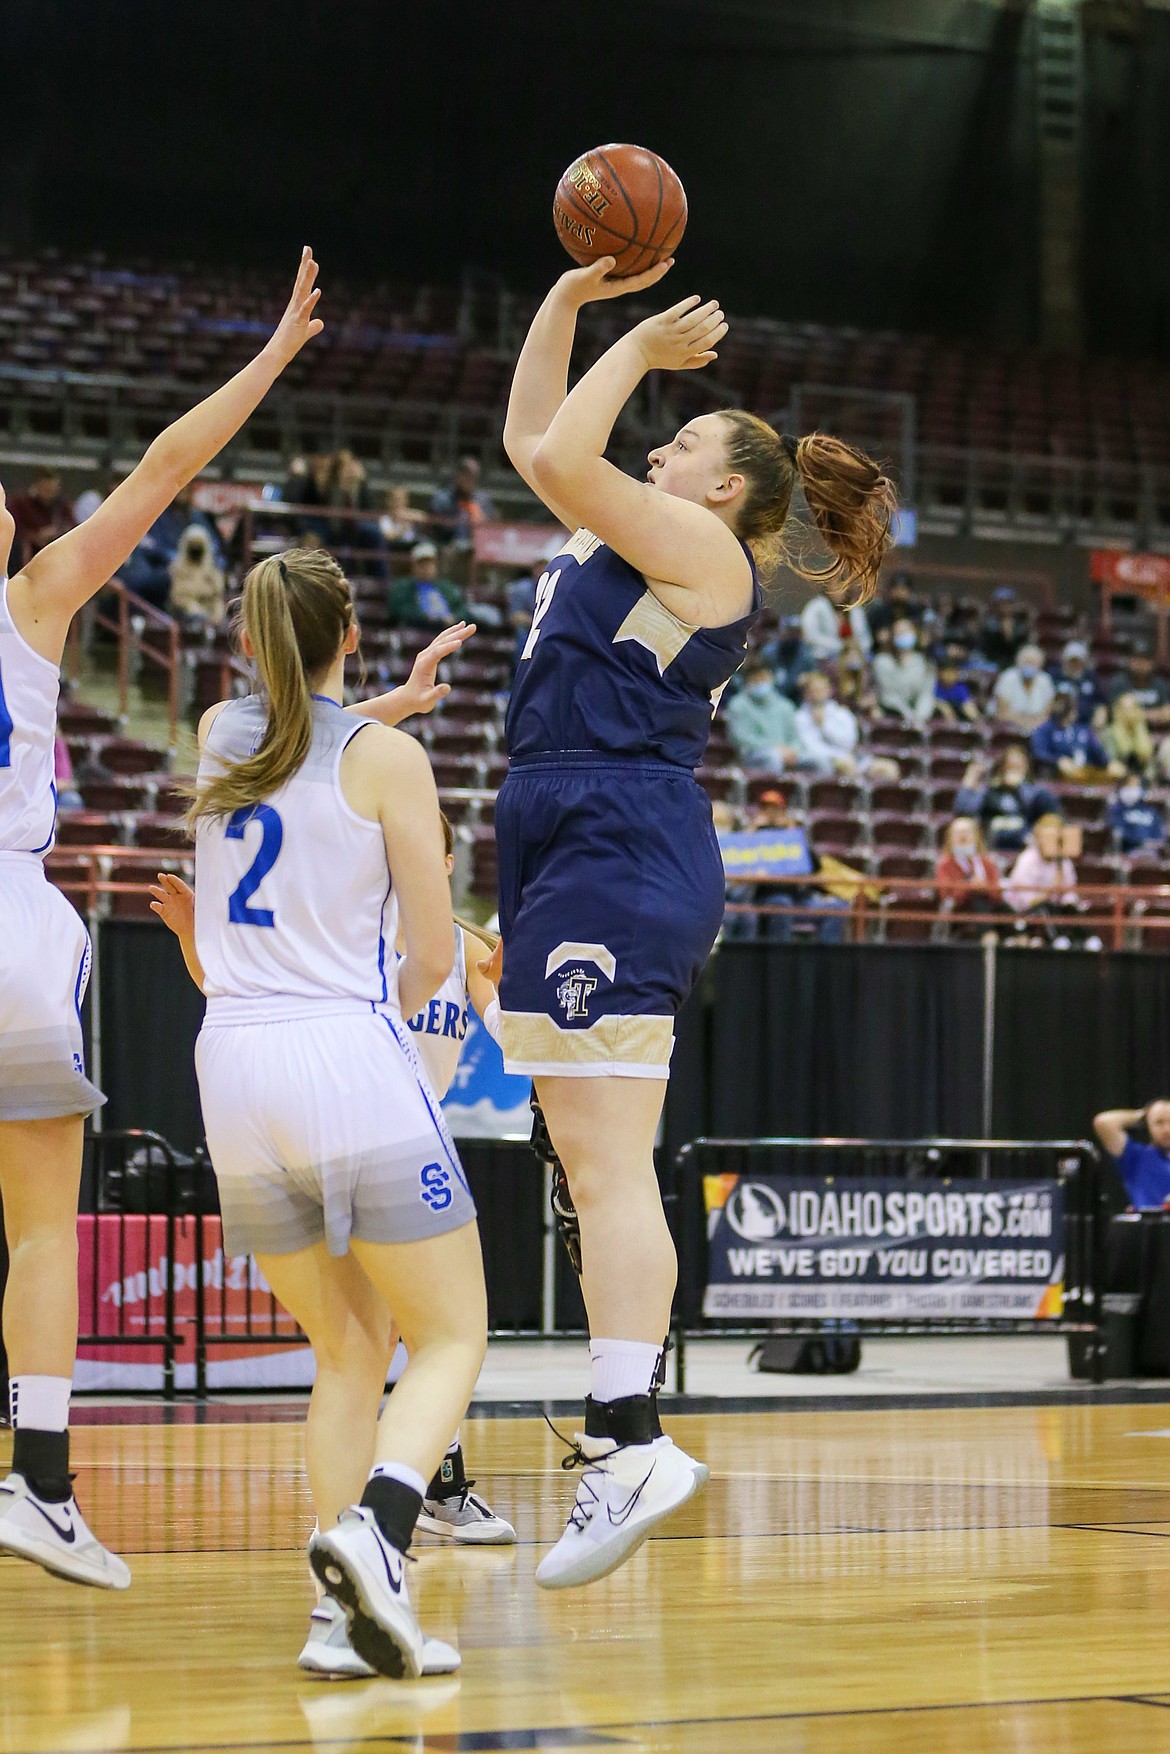 JASON DUCHOW PHOTOGRAPHY
Blayre Jeffs of Timberlake puts up a shot in the lane against Sugar-Salem in the championship game of the state 3A girls basketball tournament Saturday at the Ford Idaho Center in Nampa.